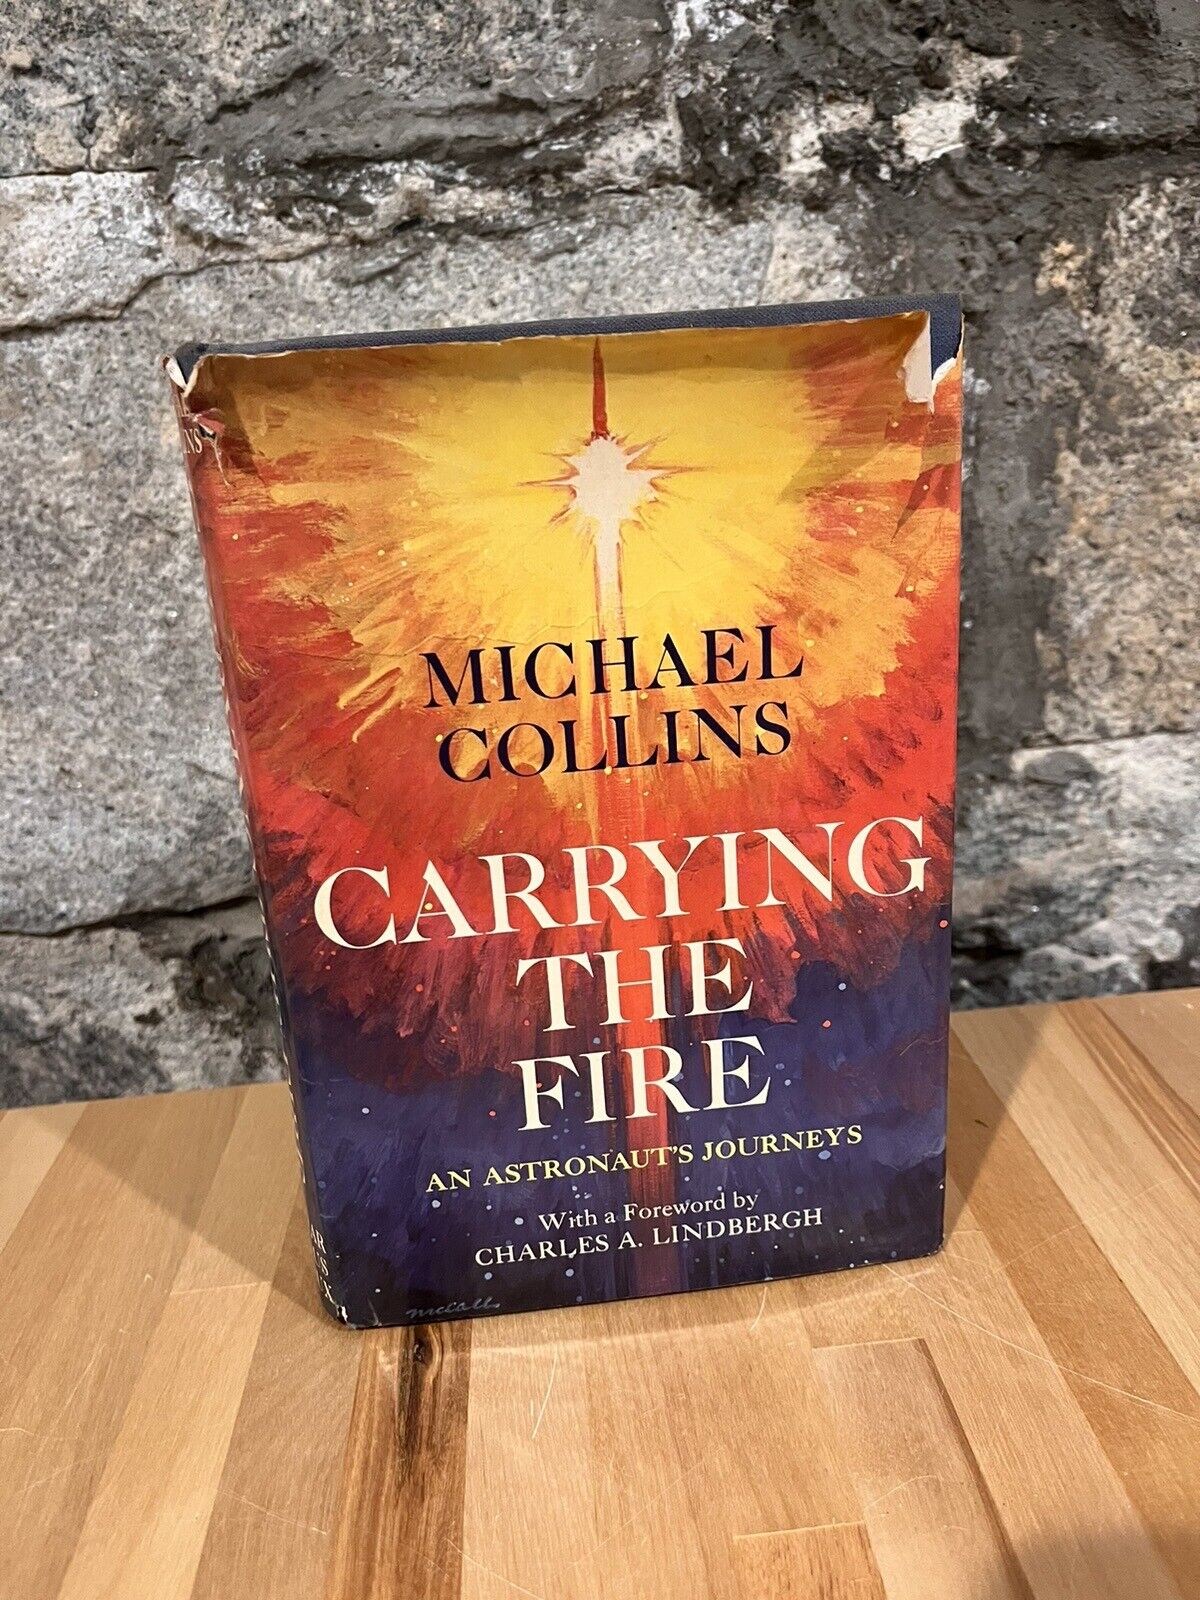 Michael Collins SIGNED/AUTOGRAPHED - Carrying the Fire FIRST Ed. 1st Printing